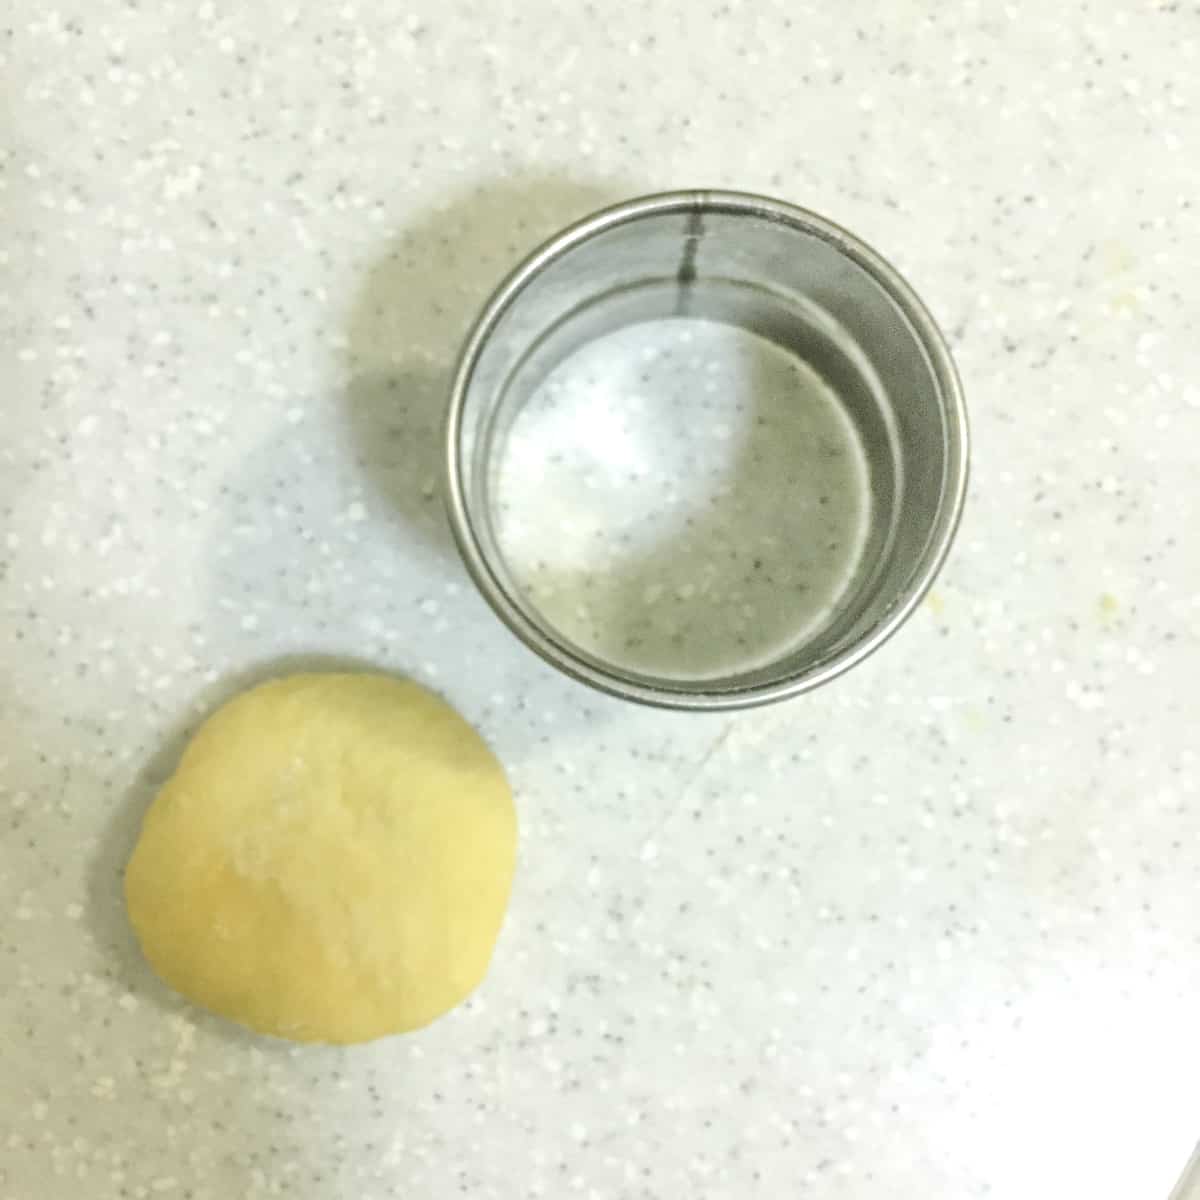 Dough outside a round cutter